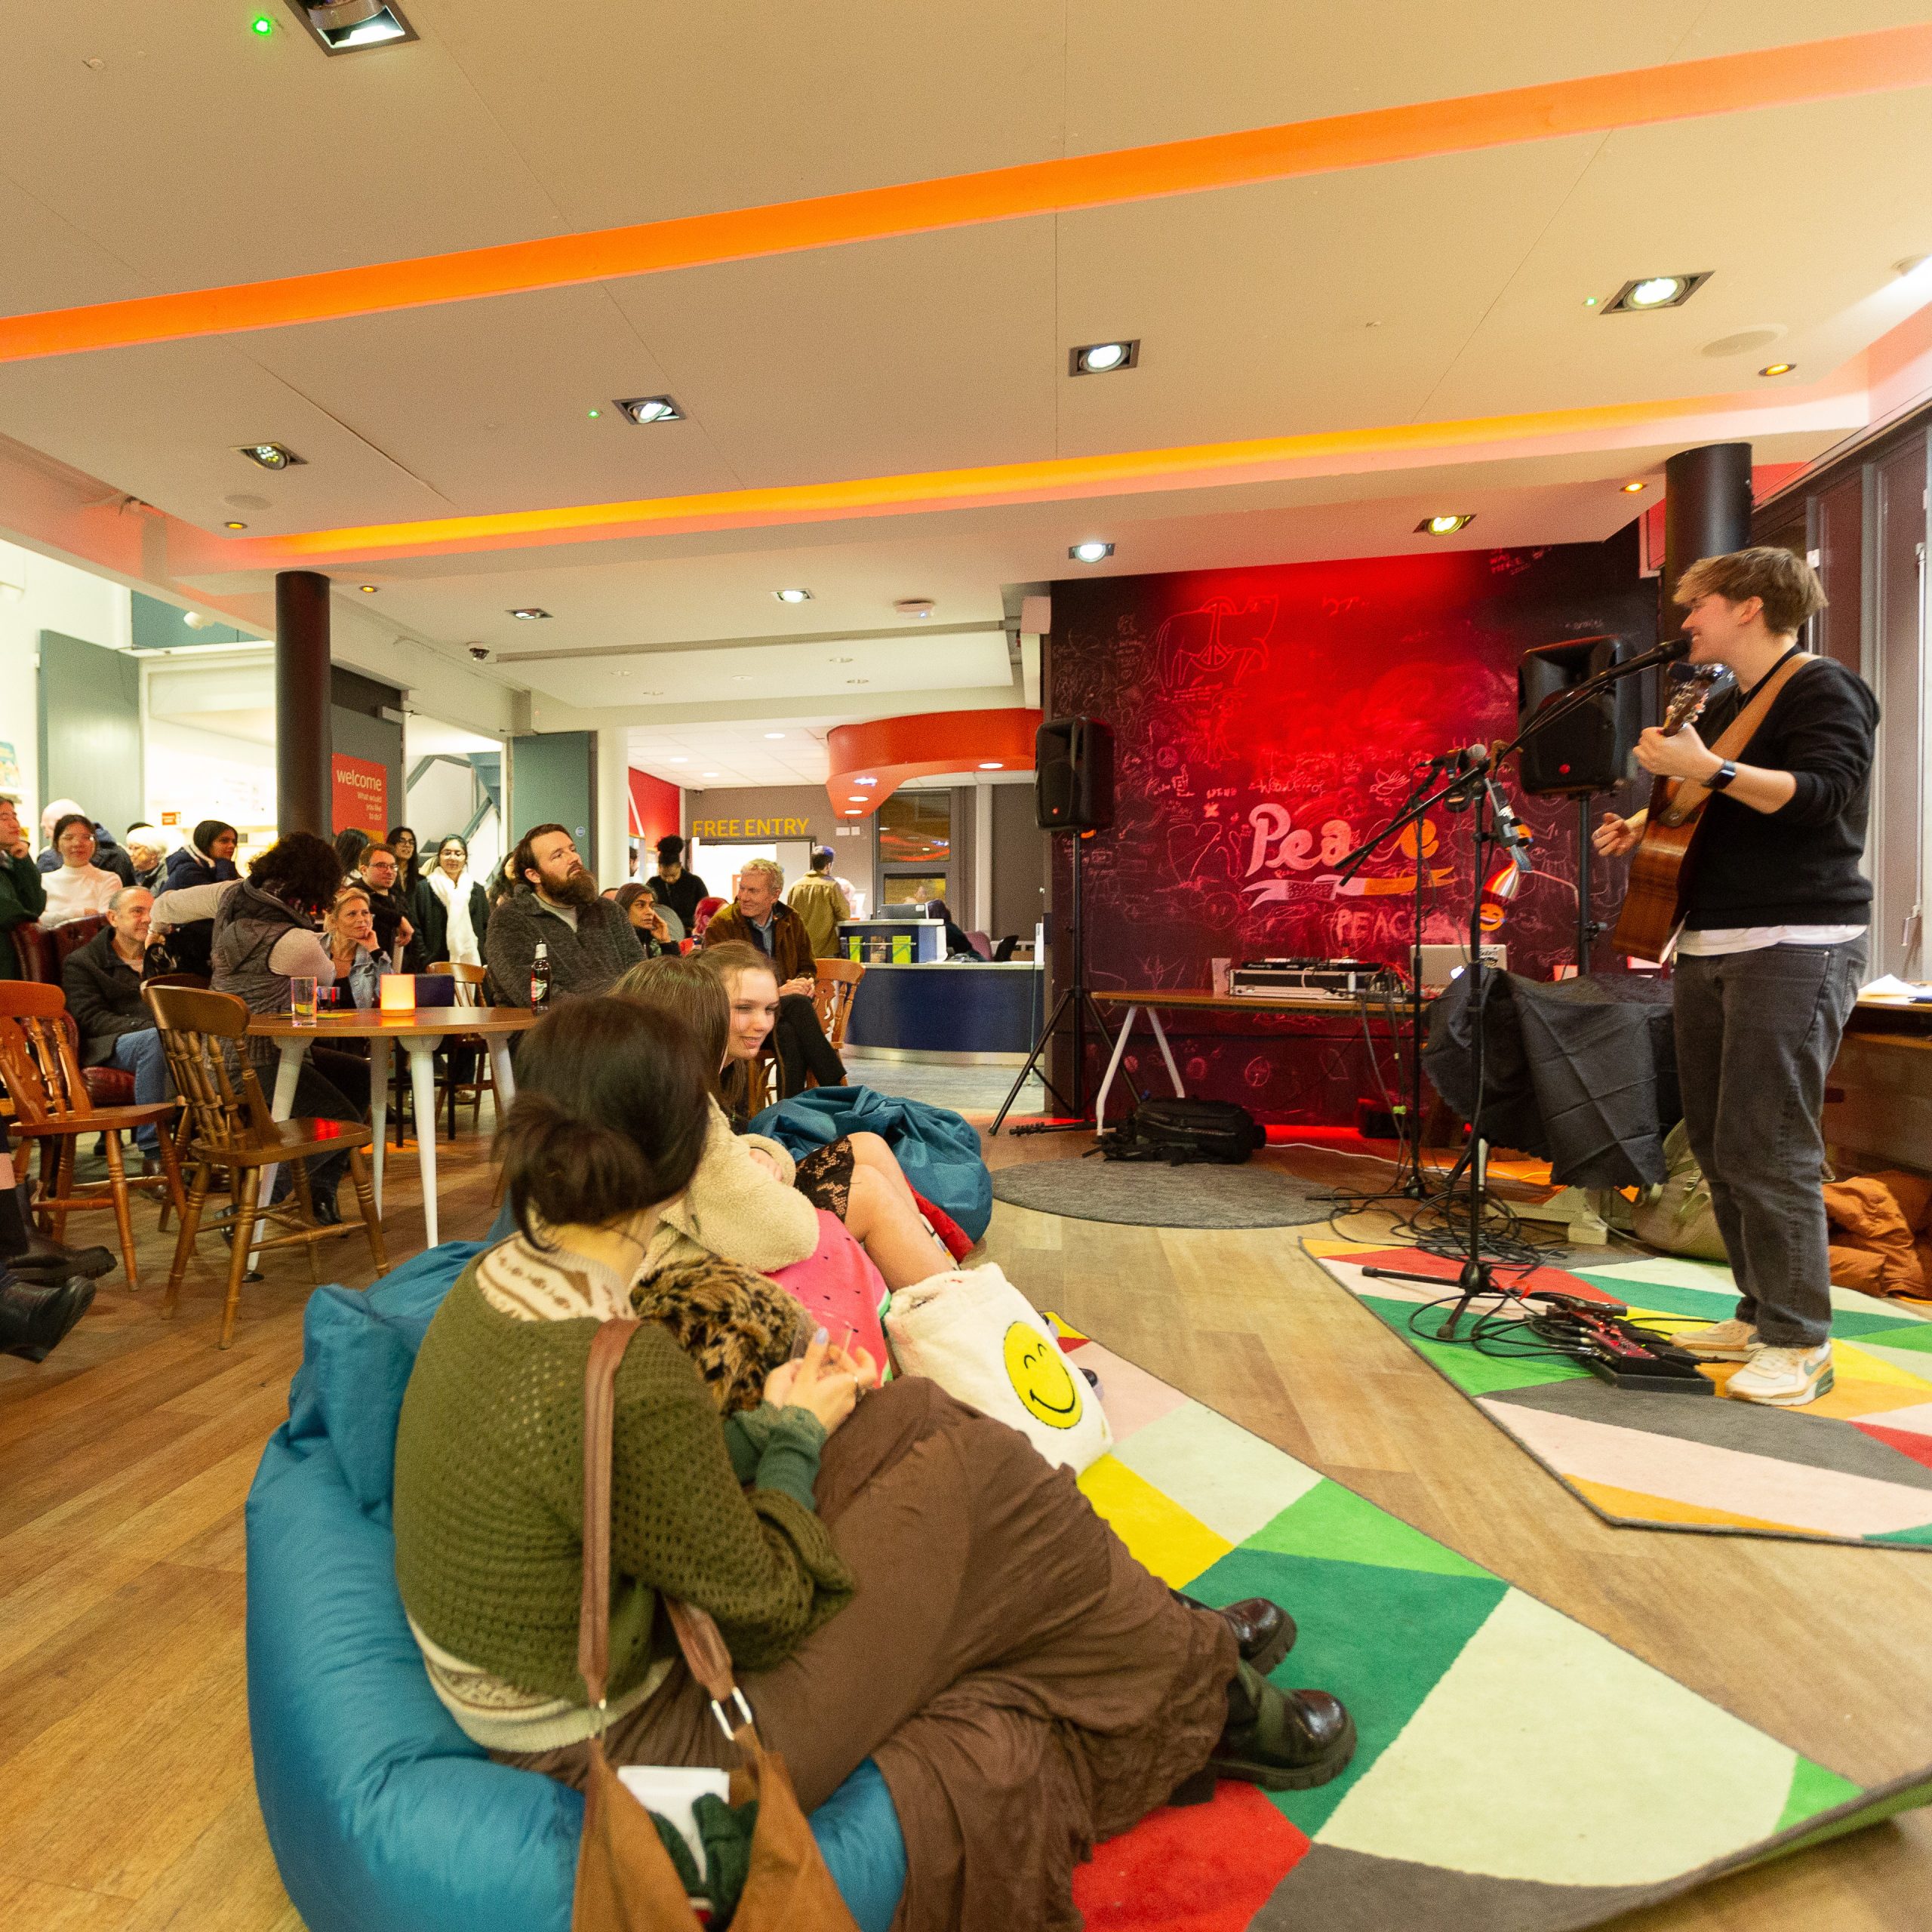 A group of people sitting on chairs or bean bags on the floor to the left, watching a person with a guitar and microphone perform music to the right.